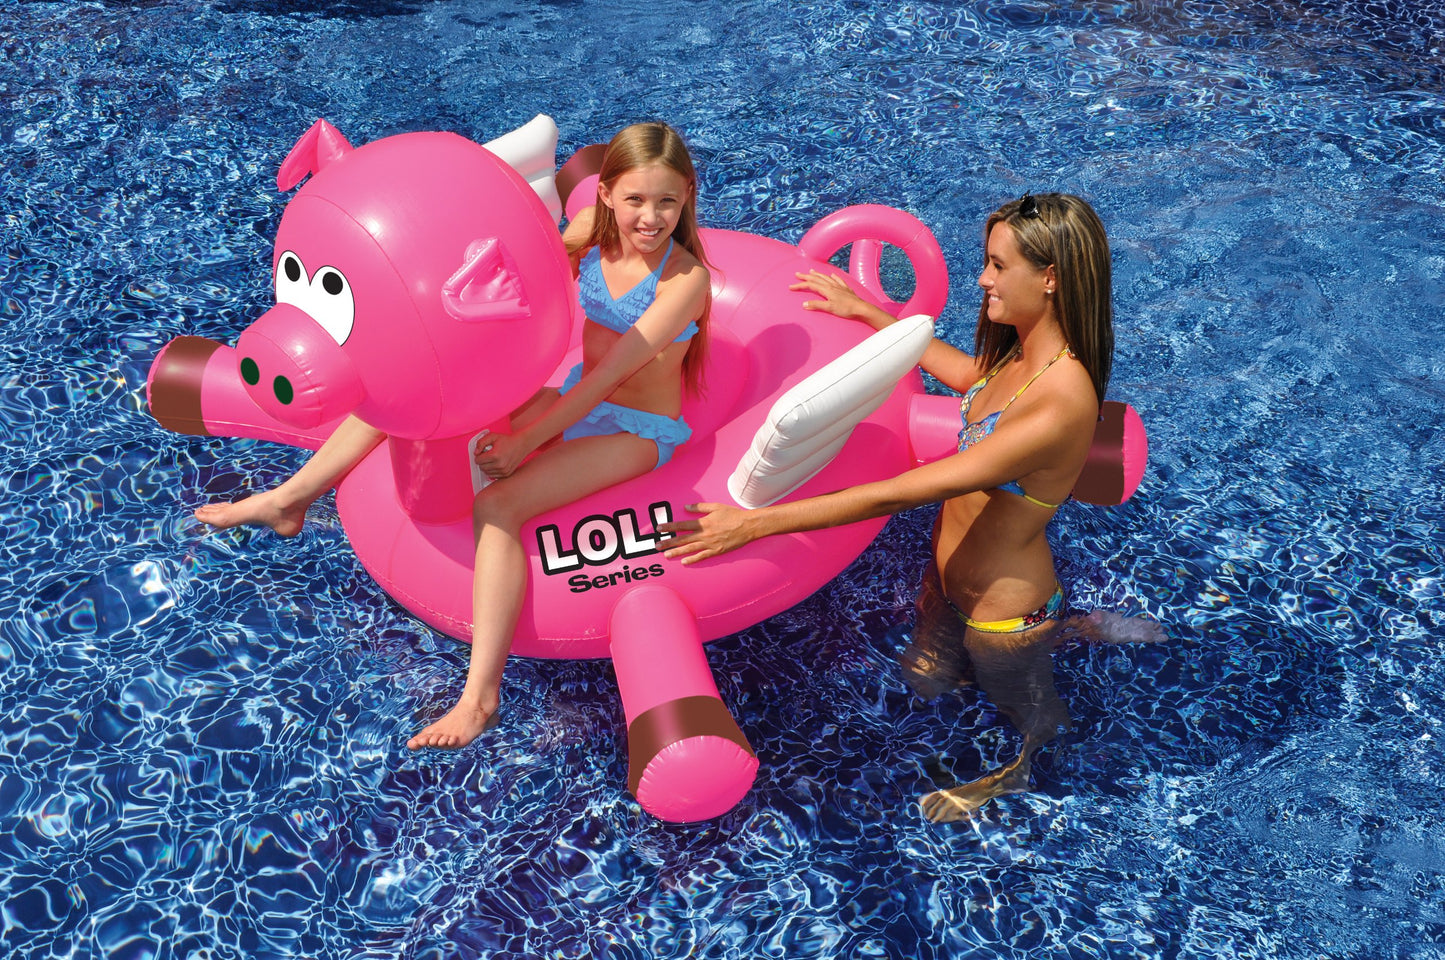 SWIMLINE Original Giant Ride On Inflatable Pool Float Lounge Series | Floaties W/Stable Legs Wings Large Rideable Blow Up Summer Beach Swimming Party Big Raft Tube Decoration Tan Toys for Kids Adults LOL Pig